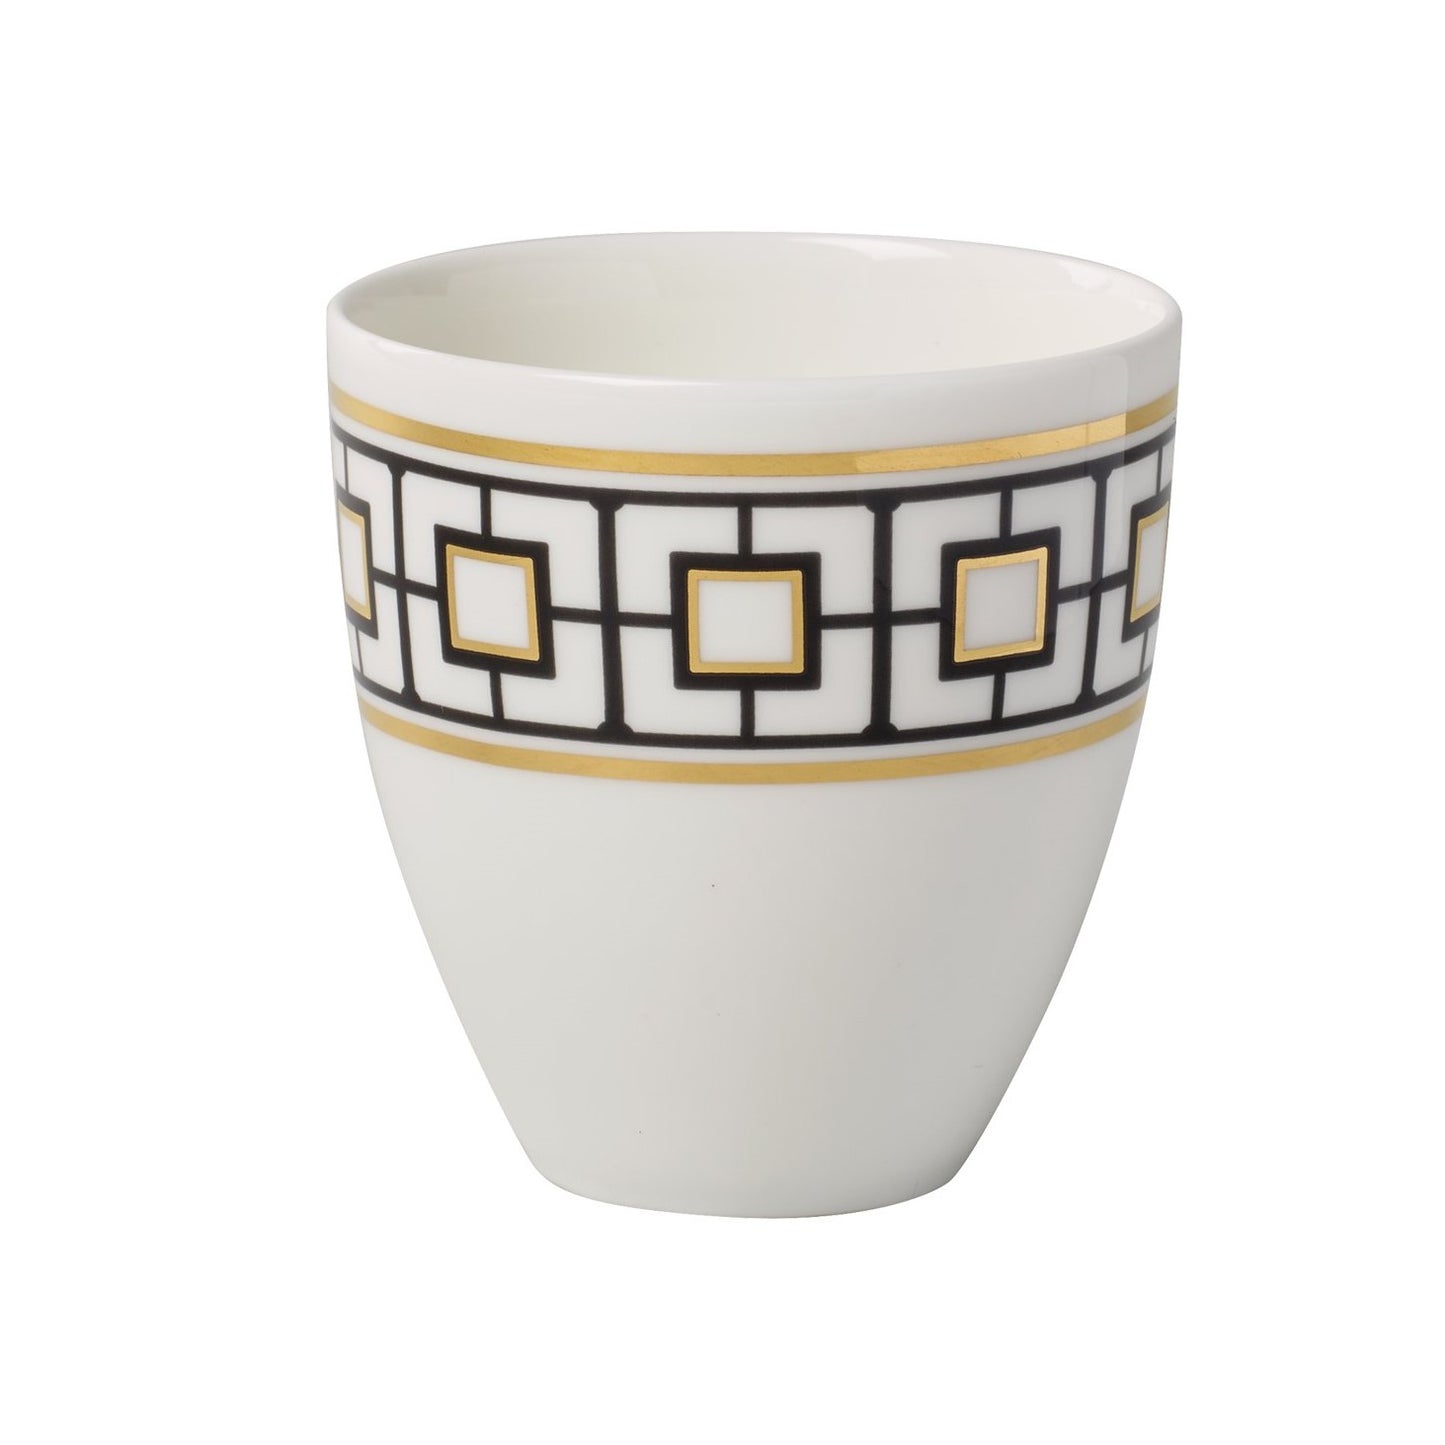 MetroChic Gift teacup 0.145L 6 pieces